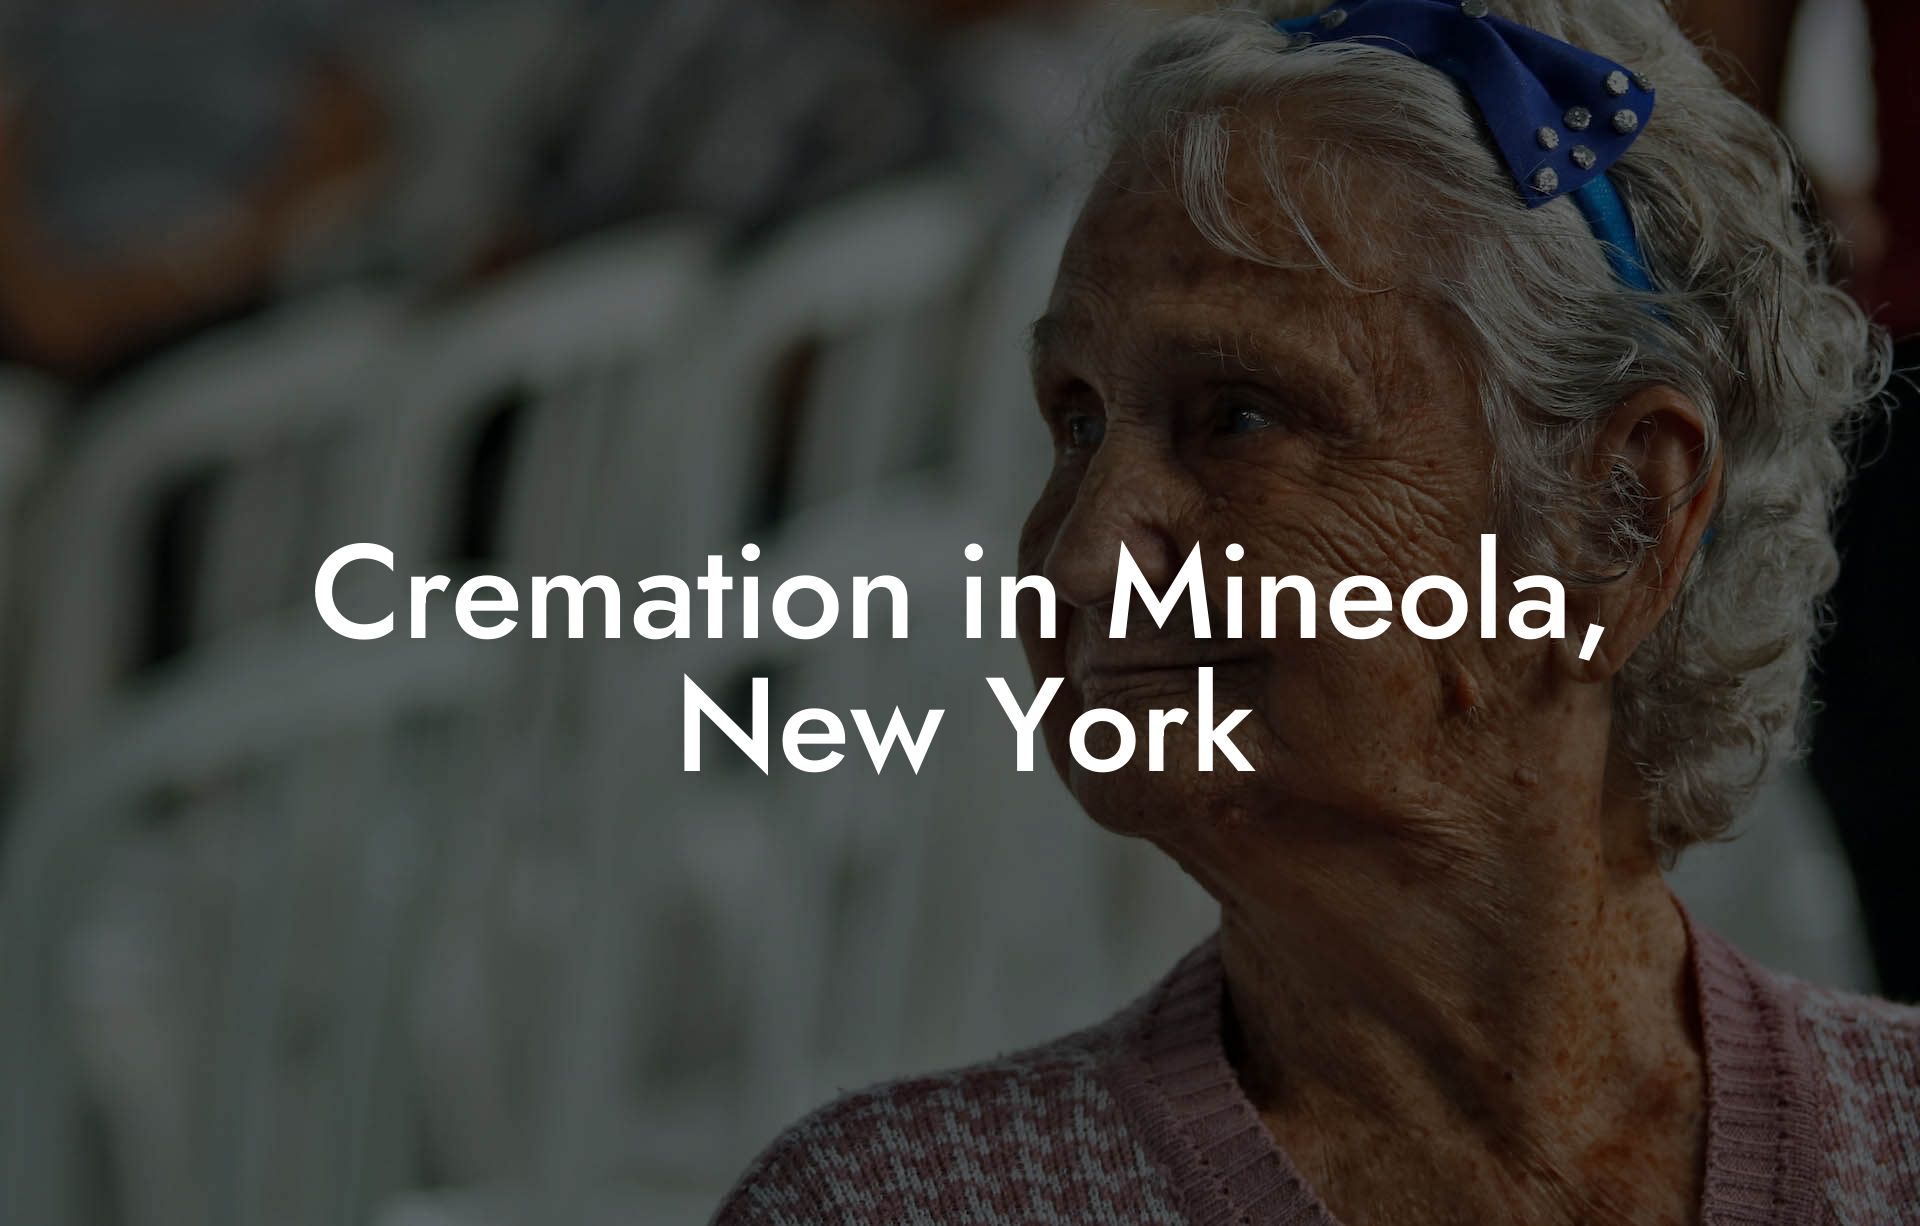 Cremation in Mineola, New York